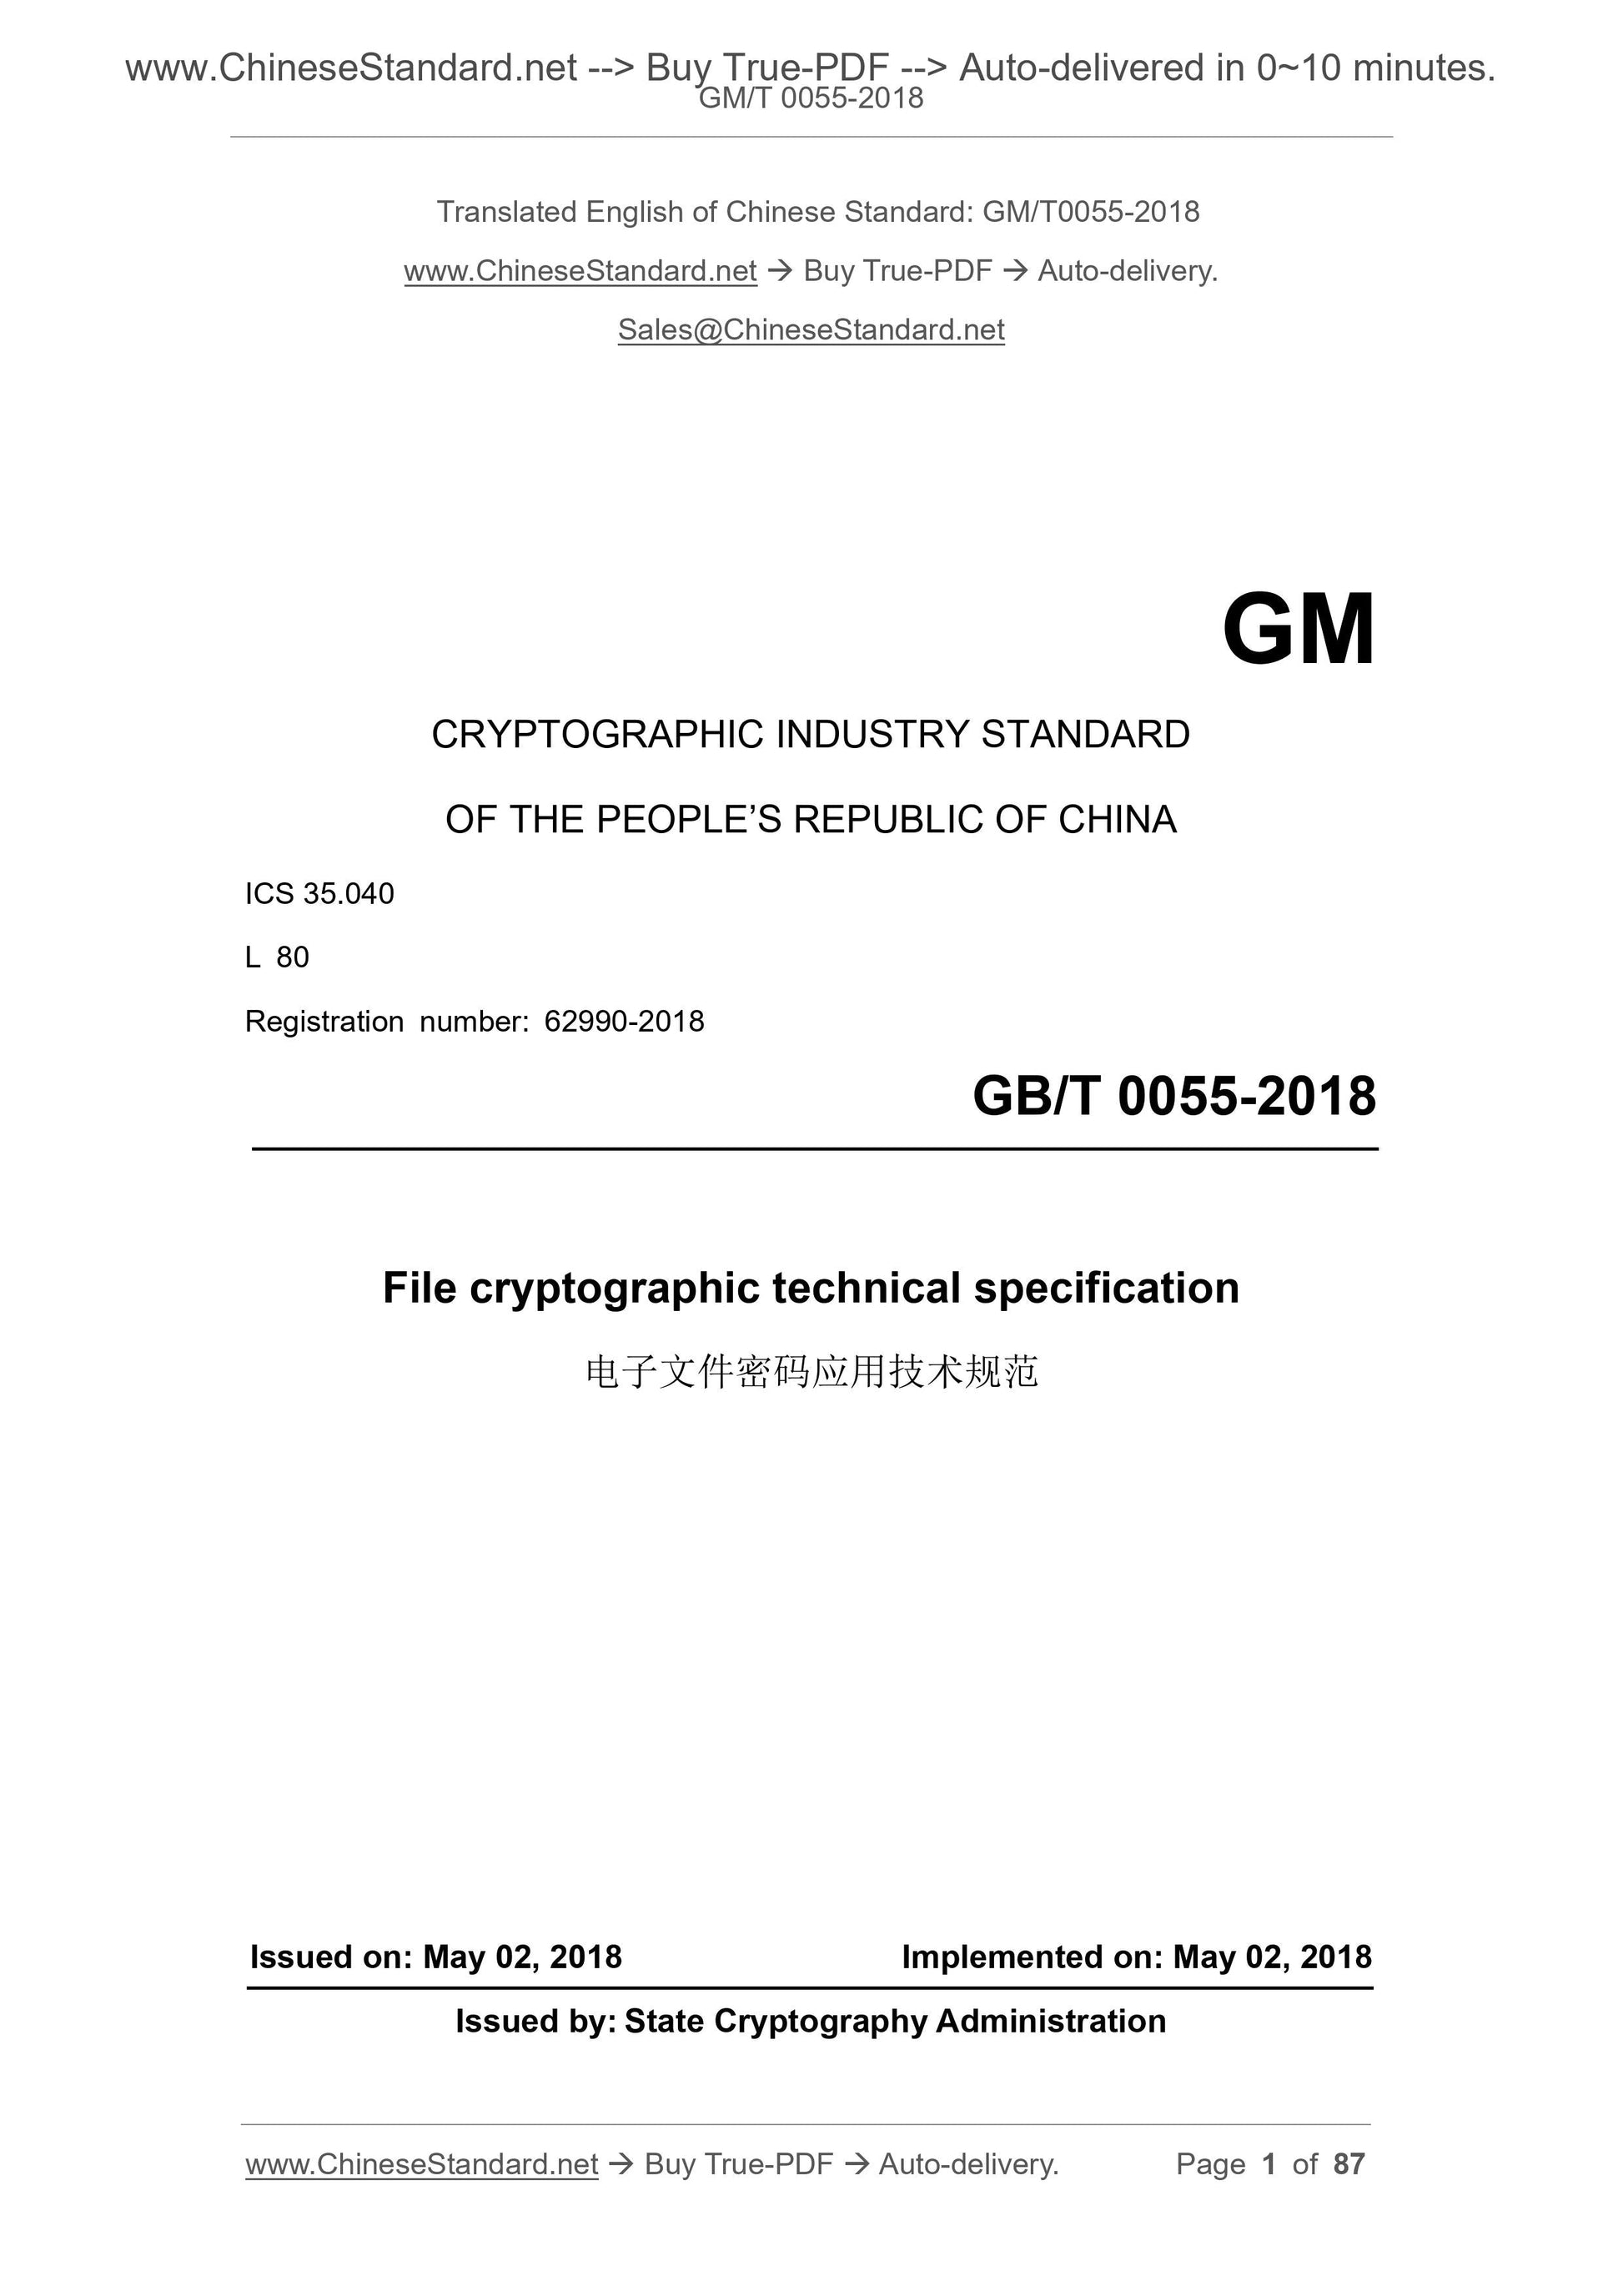 GM/T 0055-2018 Page 1